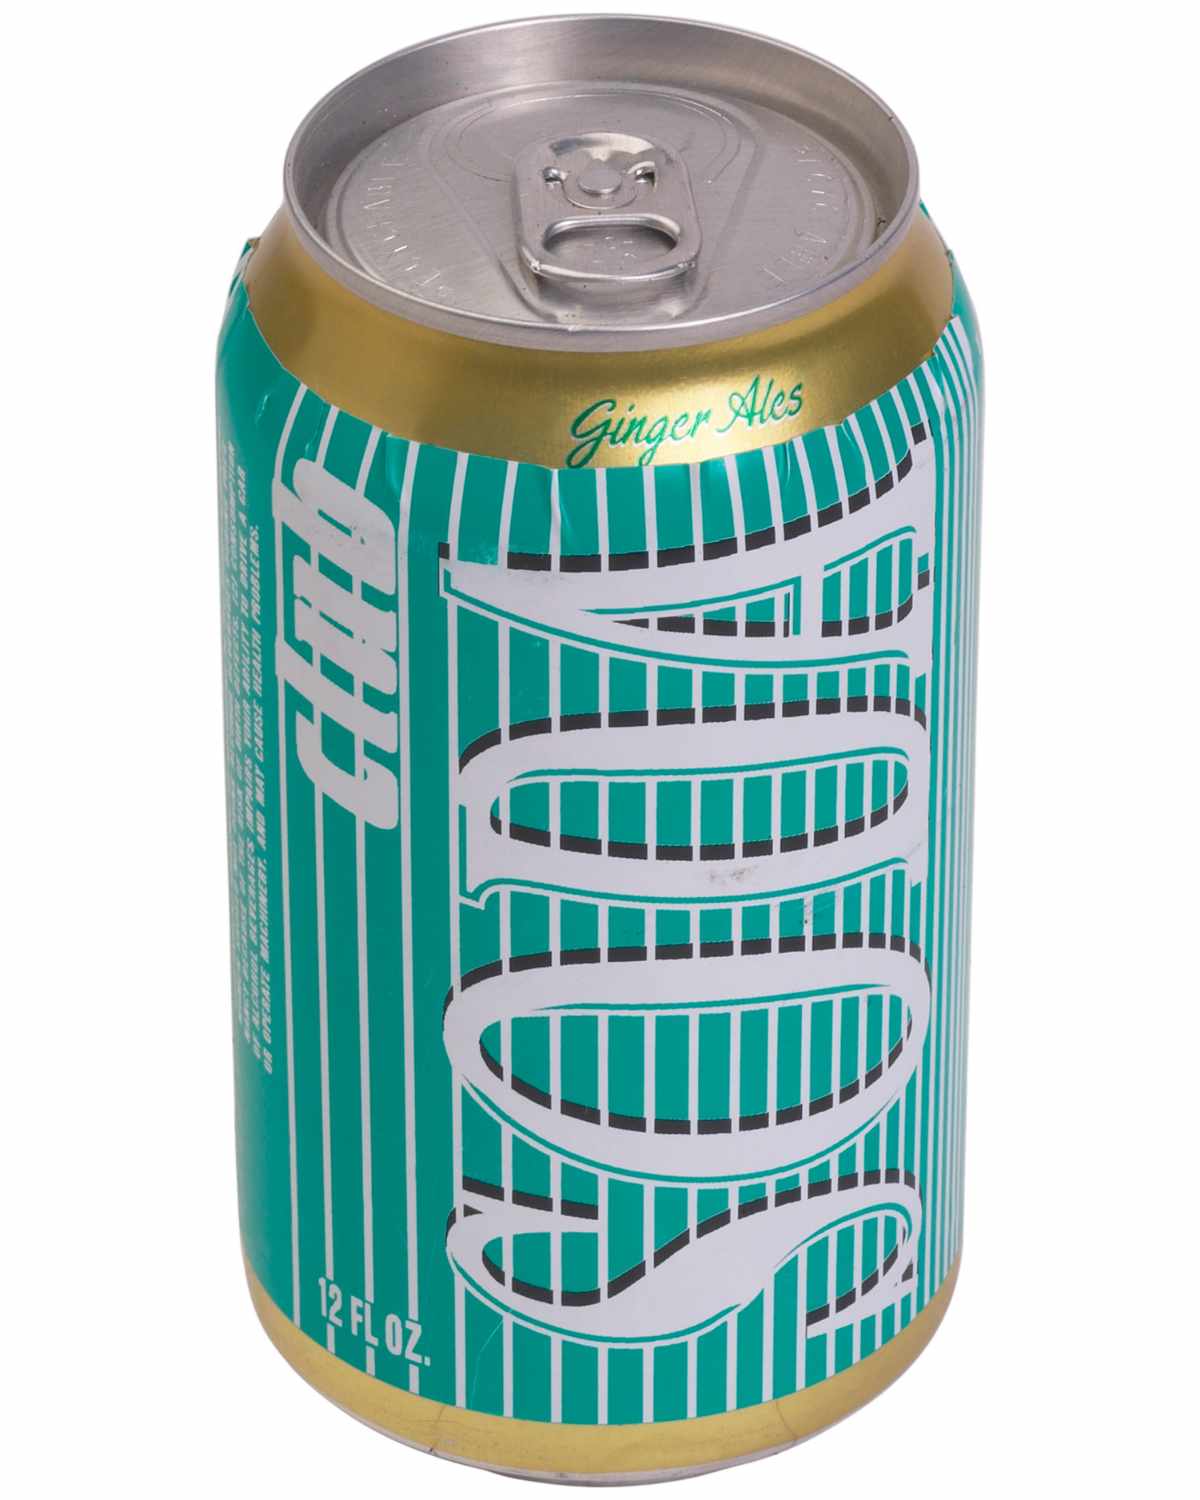 A can of club soda on a white background.